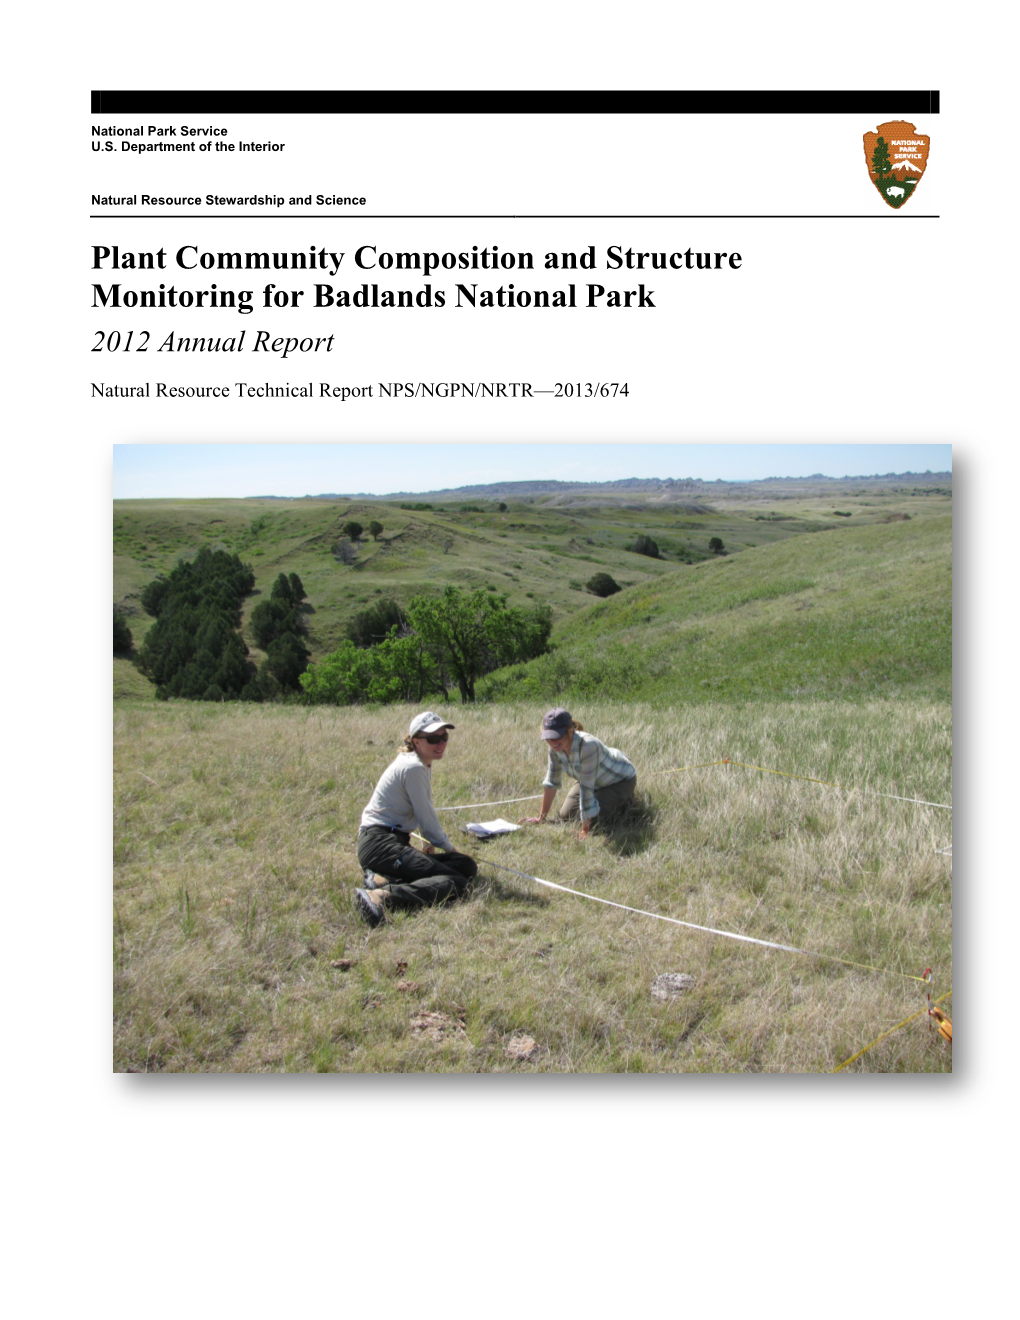 Plant Community Composition and Structure Monitoring for Badlands National Park 2012 Annual Report